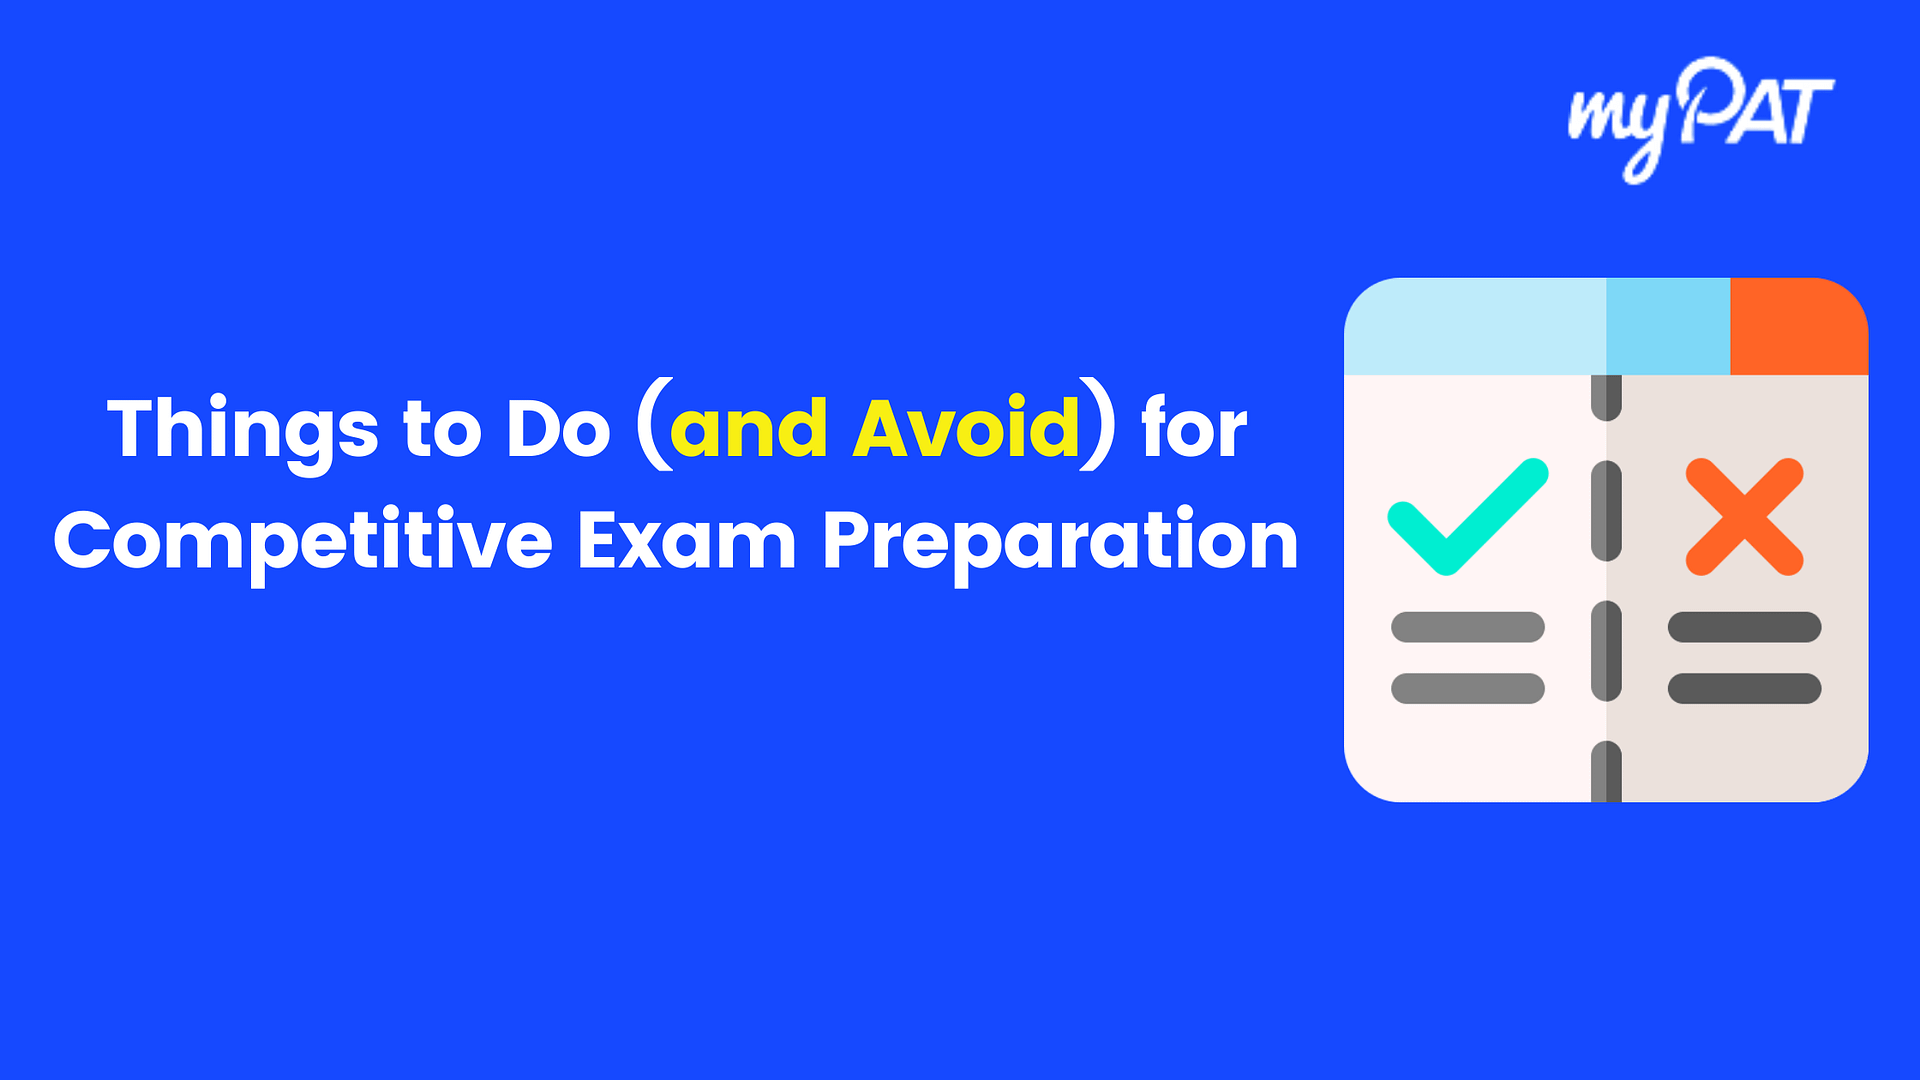 Things to Do (and Avoid) for Competitive Exam Preparation - myPAT